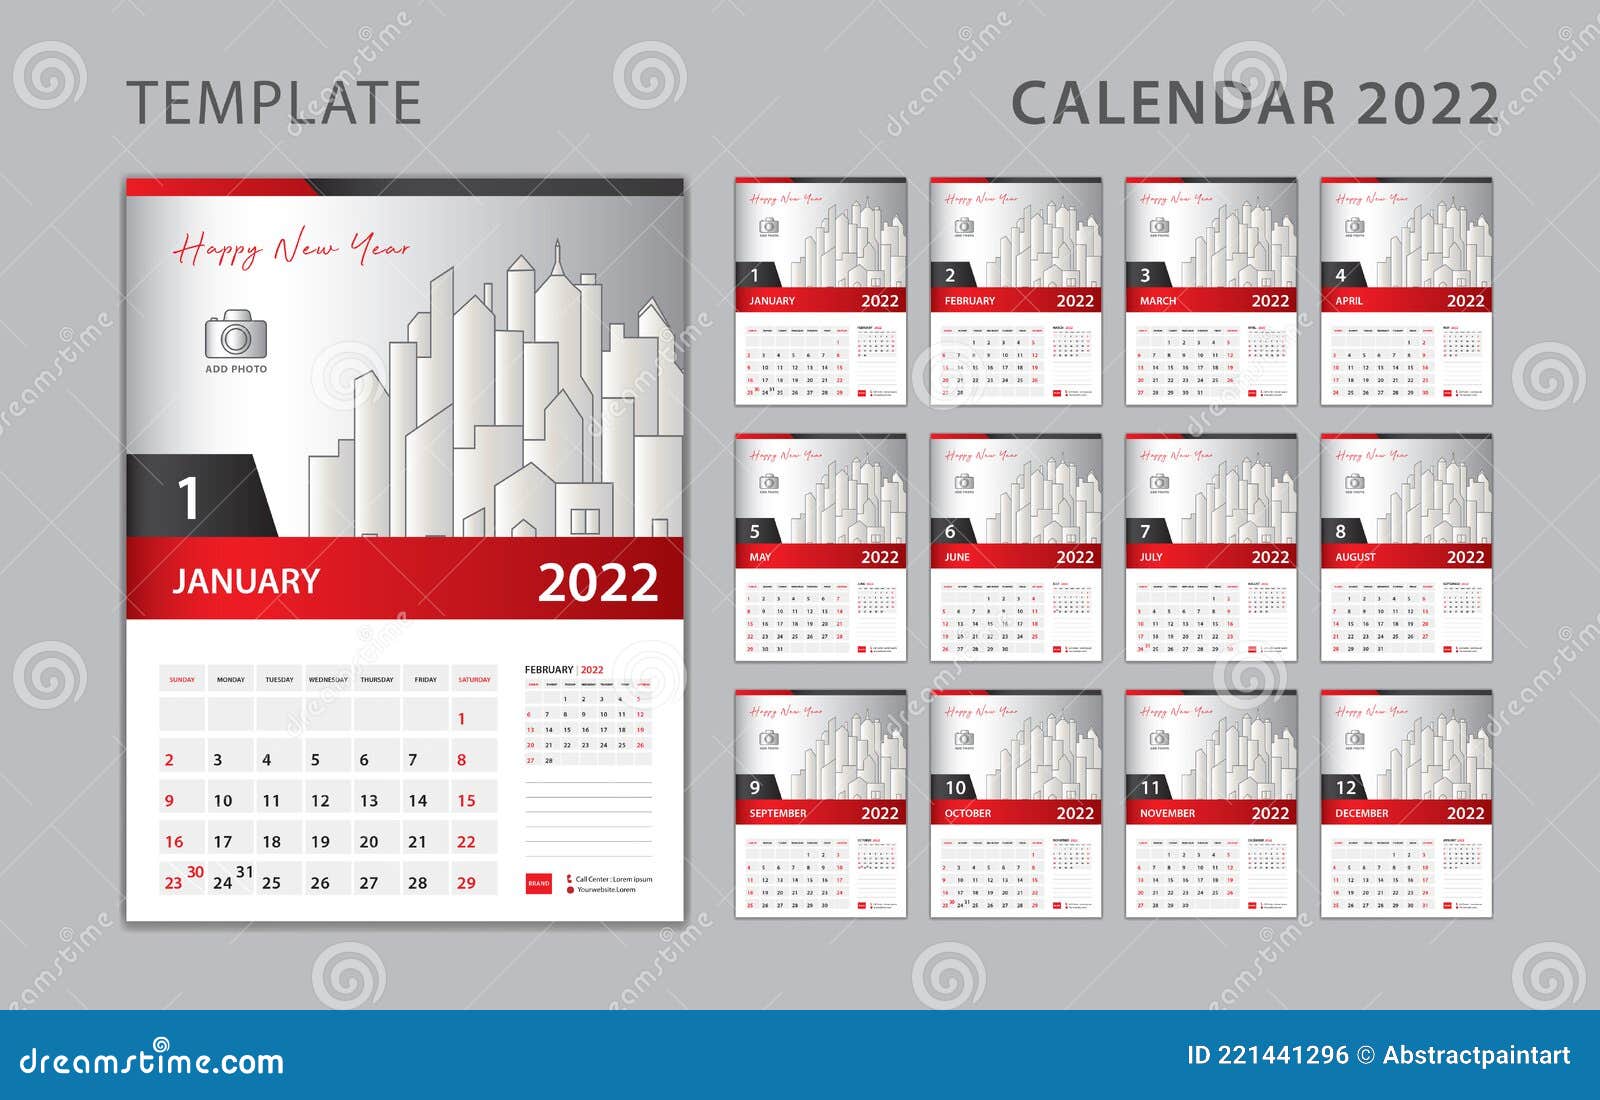 Calendar 2022 Template Set Desk Calendar Design With Place For Photo And Company Logo Wall Calendar 2022 Year Stock Vector Illustration Of Date Banner 221441296